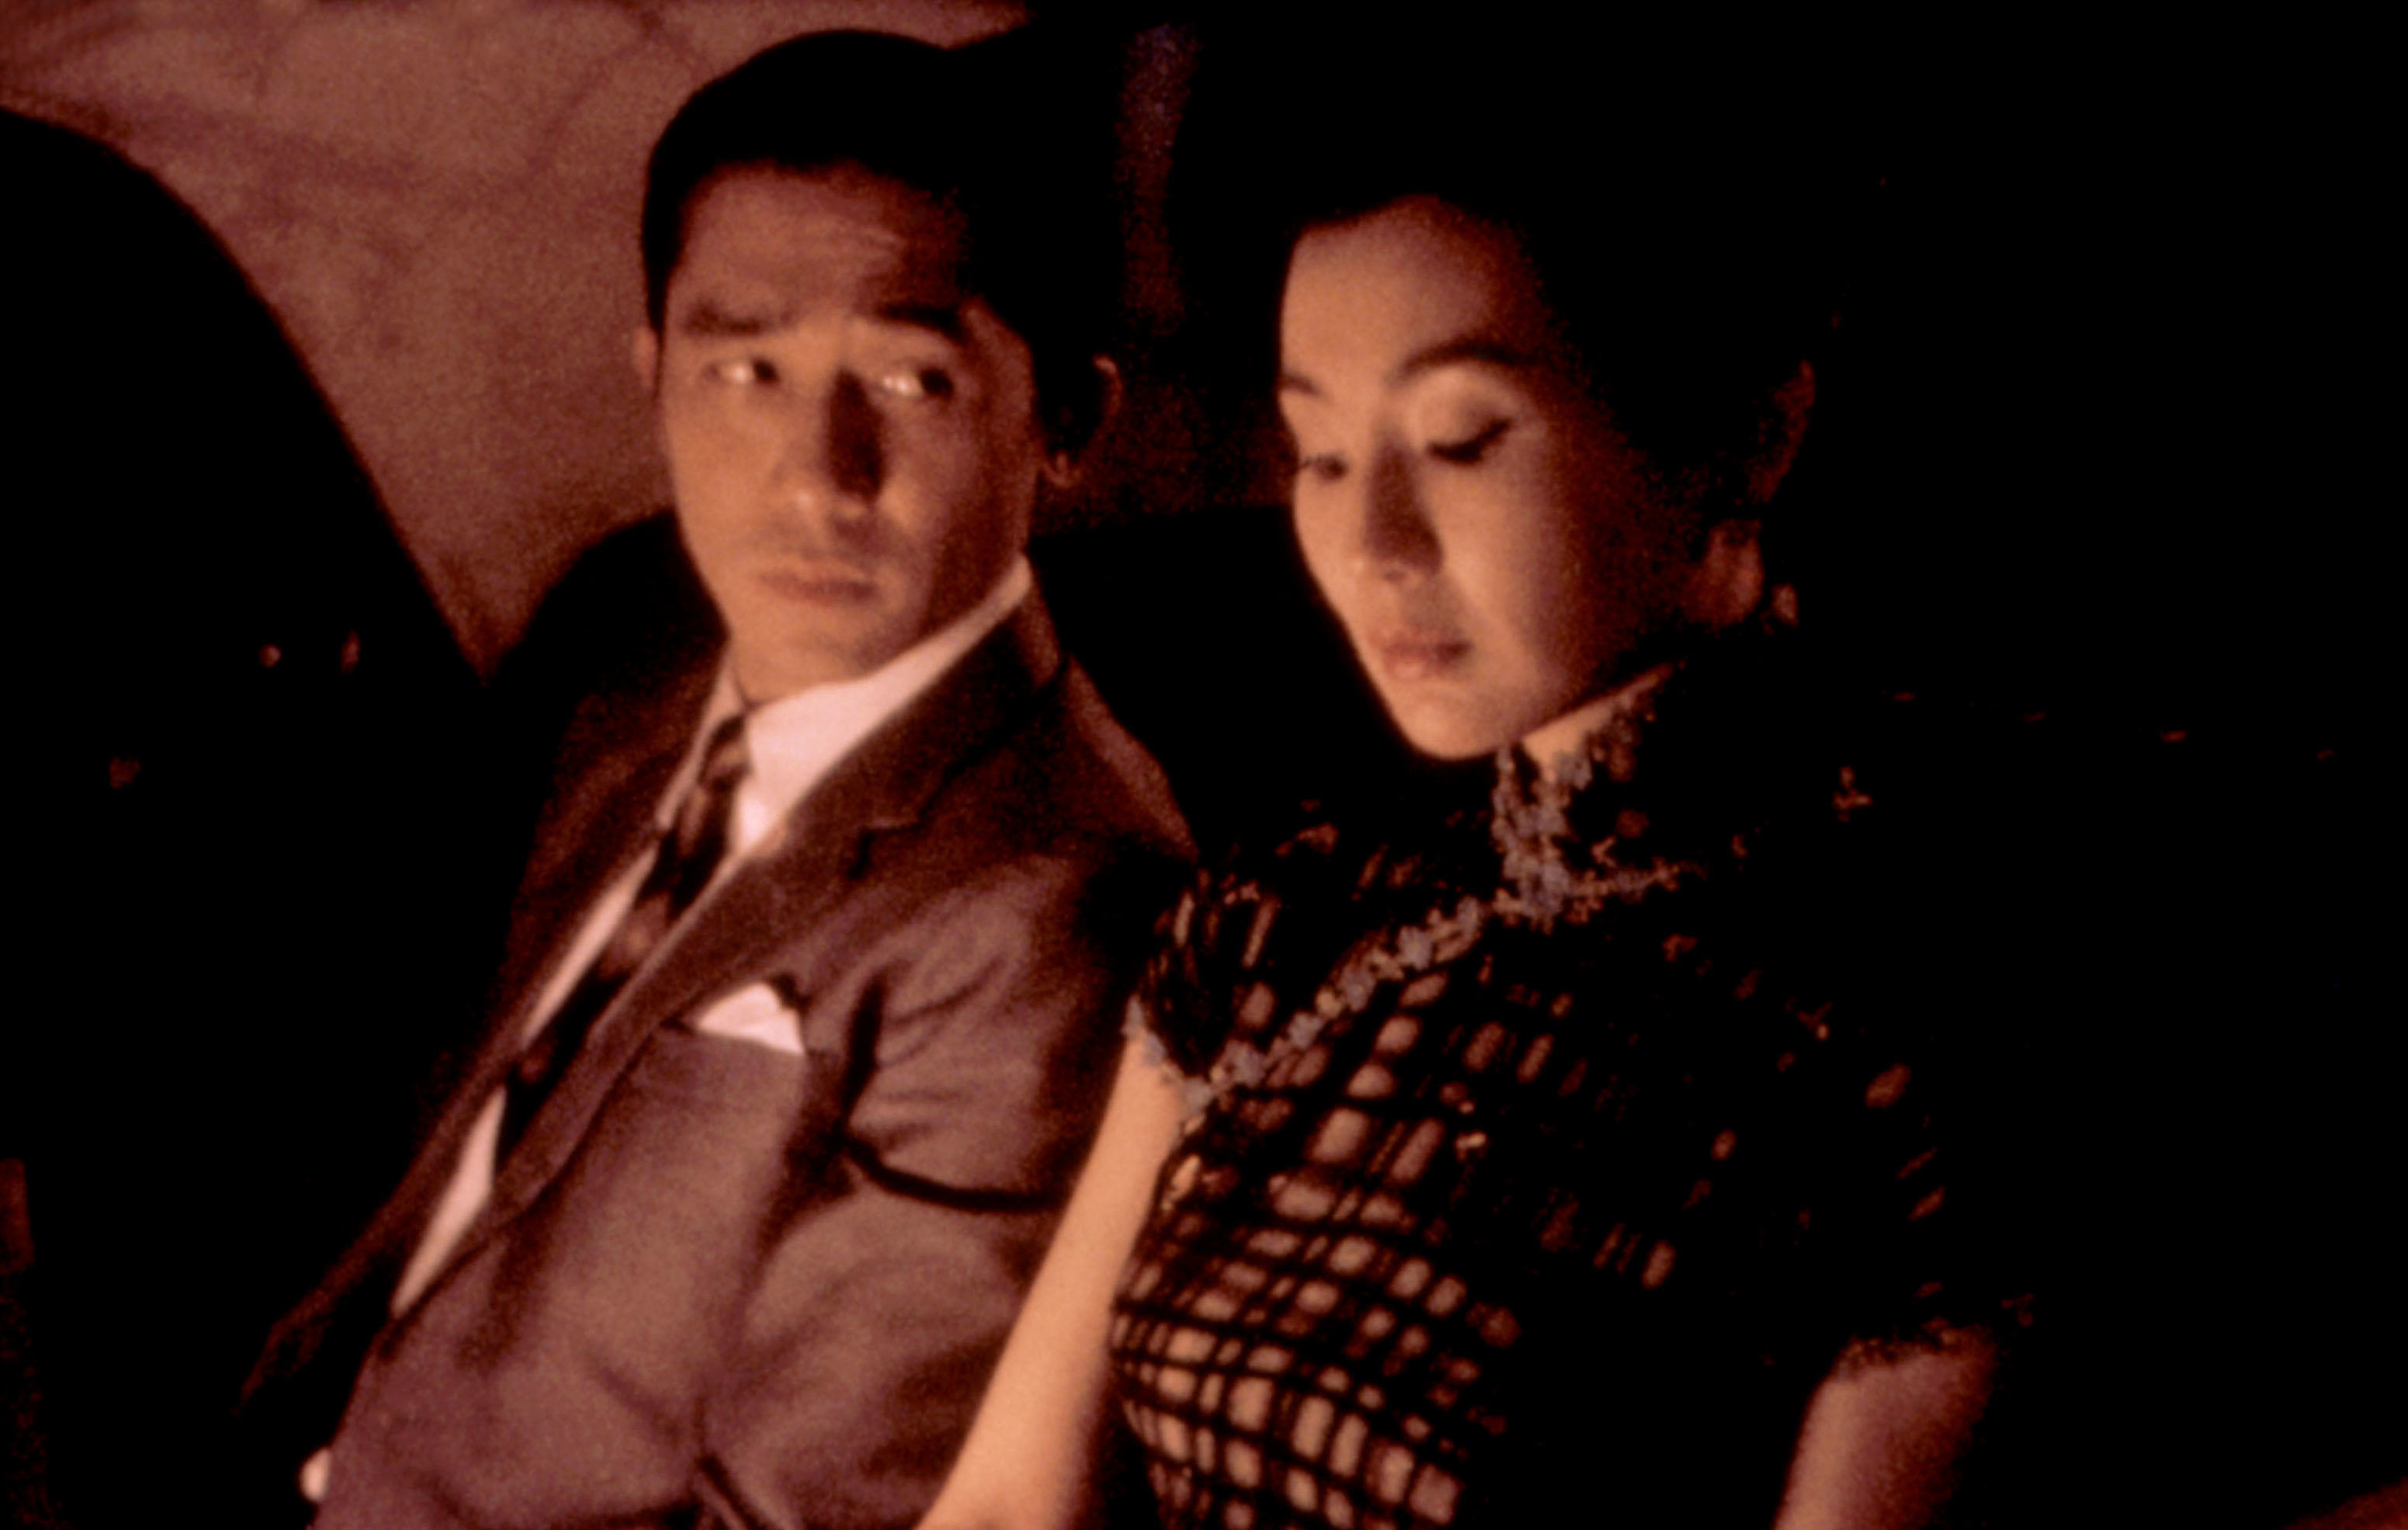 A man in a suit and a woman in a cheongsam sit close together, conveying a sense of intimacy or tension